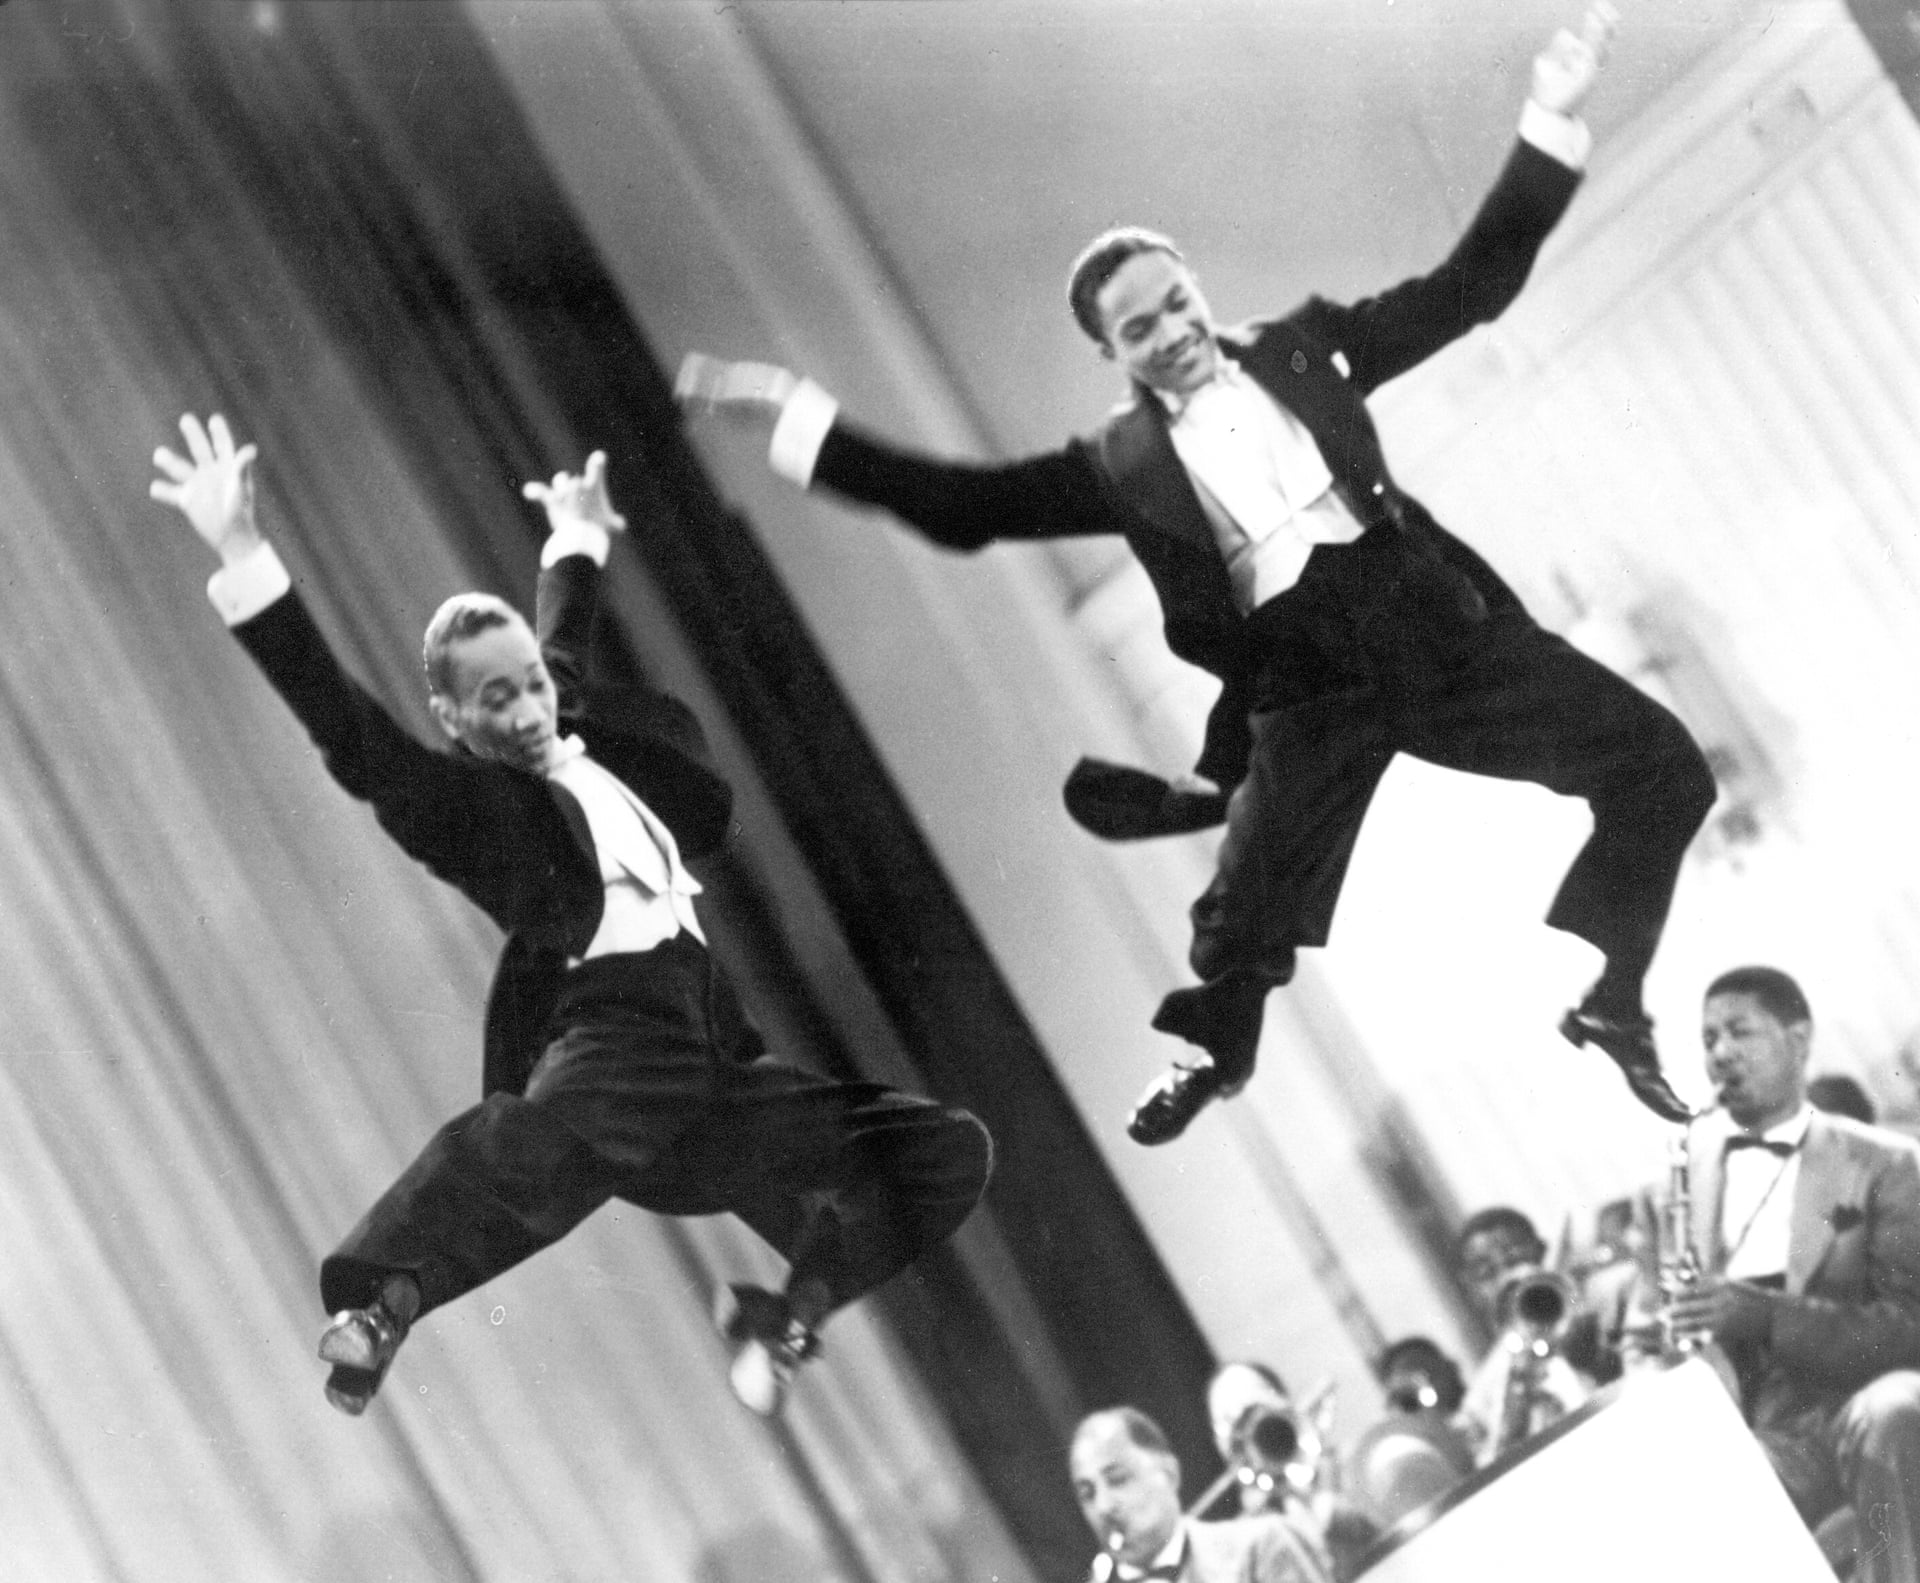 The Fabulous Nicholas brothers